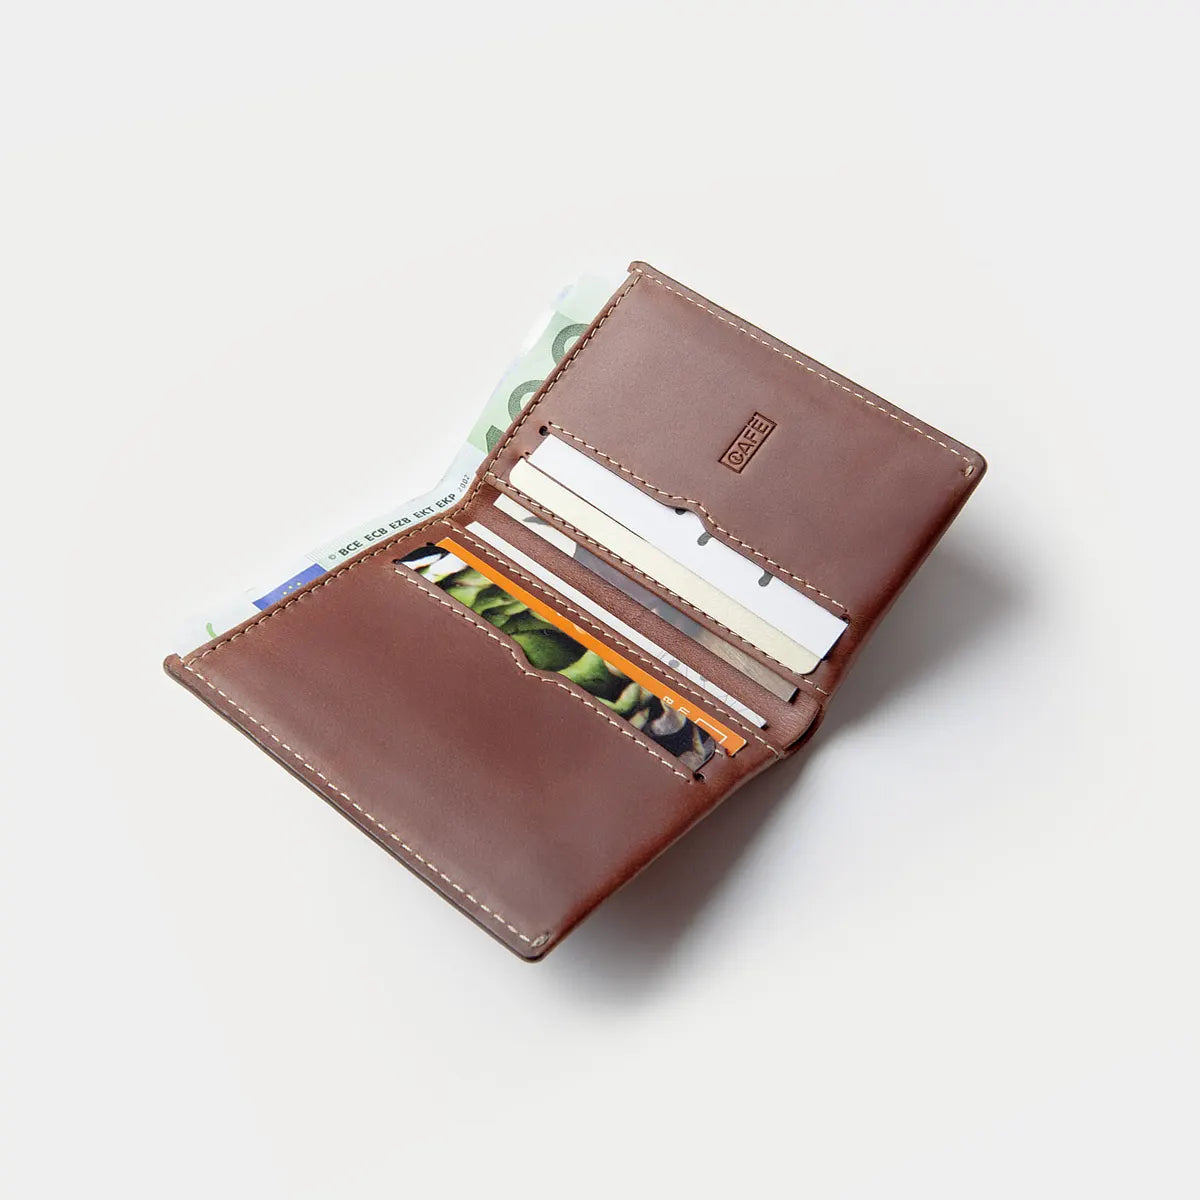 Slim Leather Wallet Costa Rica - Roasted